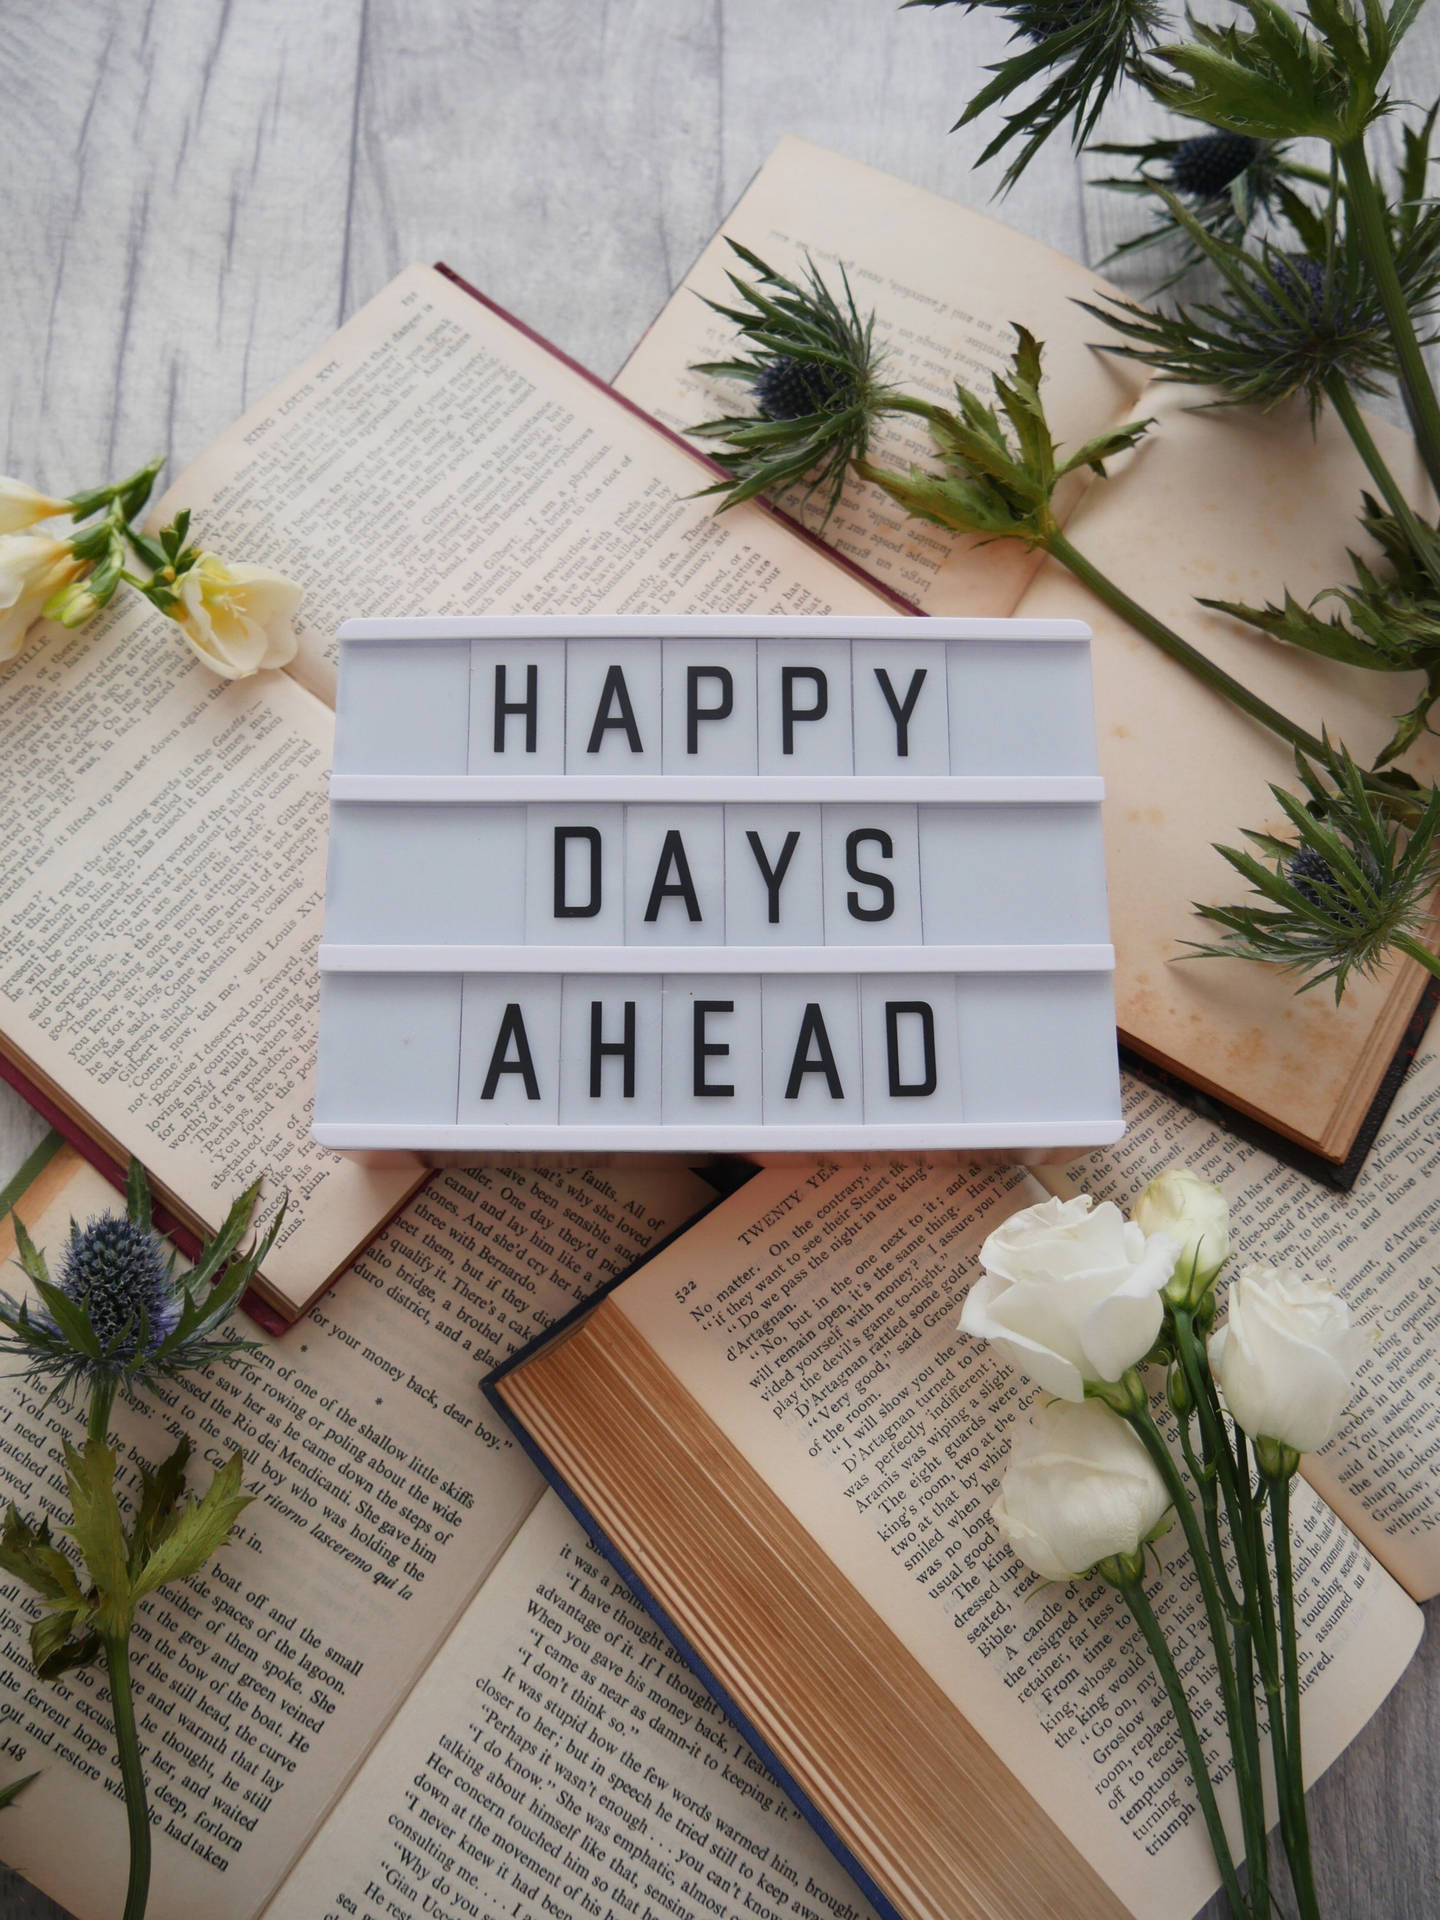 Happy Days Ahead Inspirational Quote Wallpaper